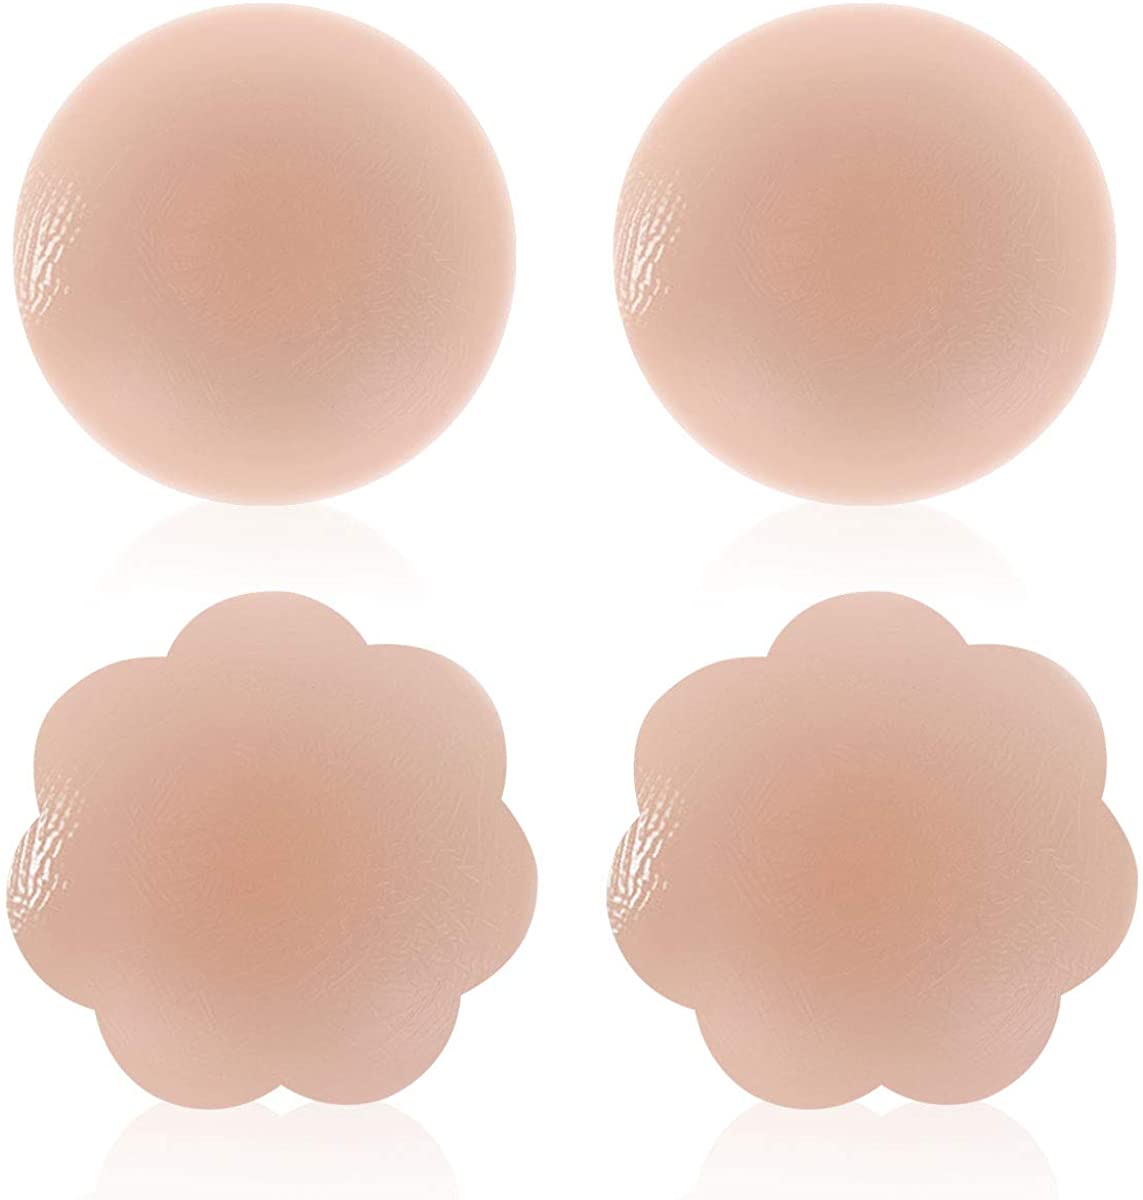 MUQU Womens Silicone Pasties, Breast Bra Reusable 2 Pairs Invisible Silicone Nipple Cover for Dress Pink at Amazon Women's Clothing store